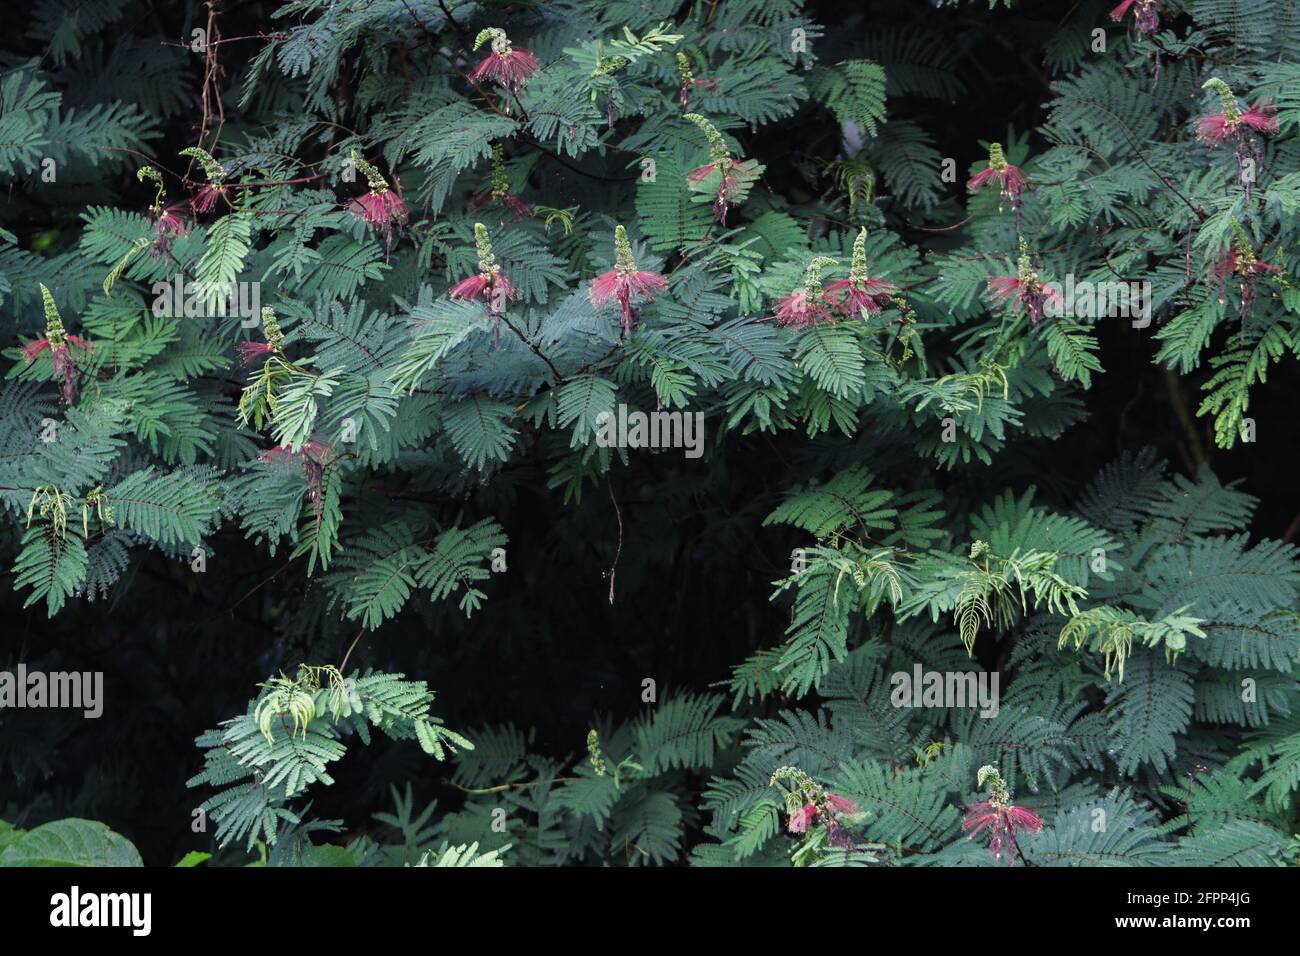 Calliandra calothyrsus with buds and open flowers. Tree pattern background. Stock Photo